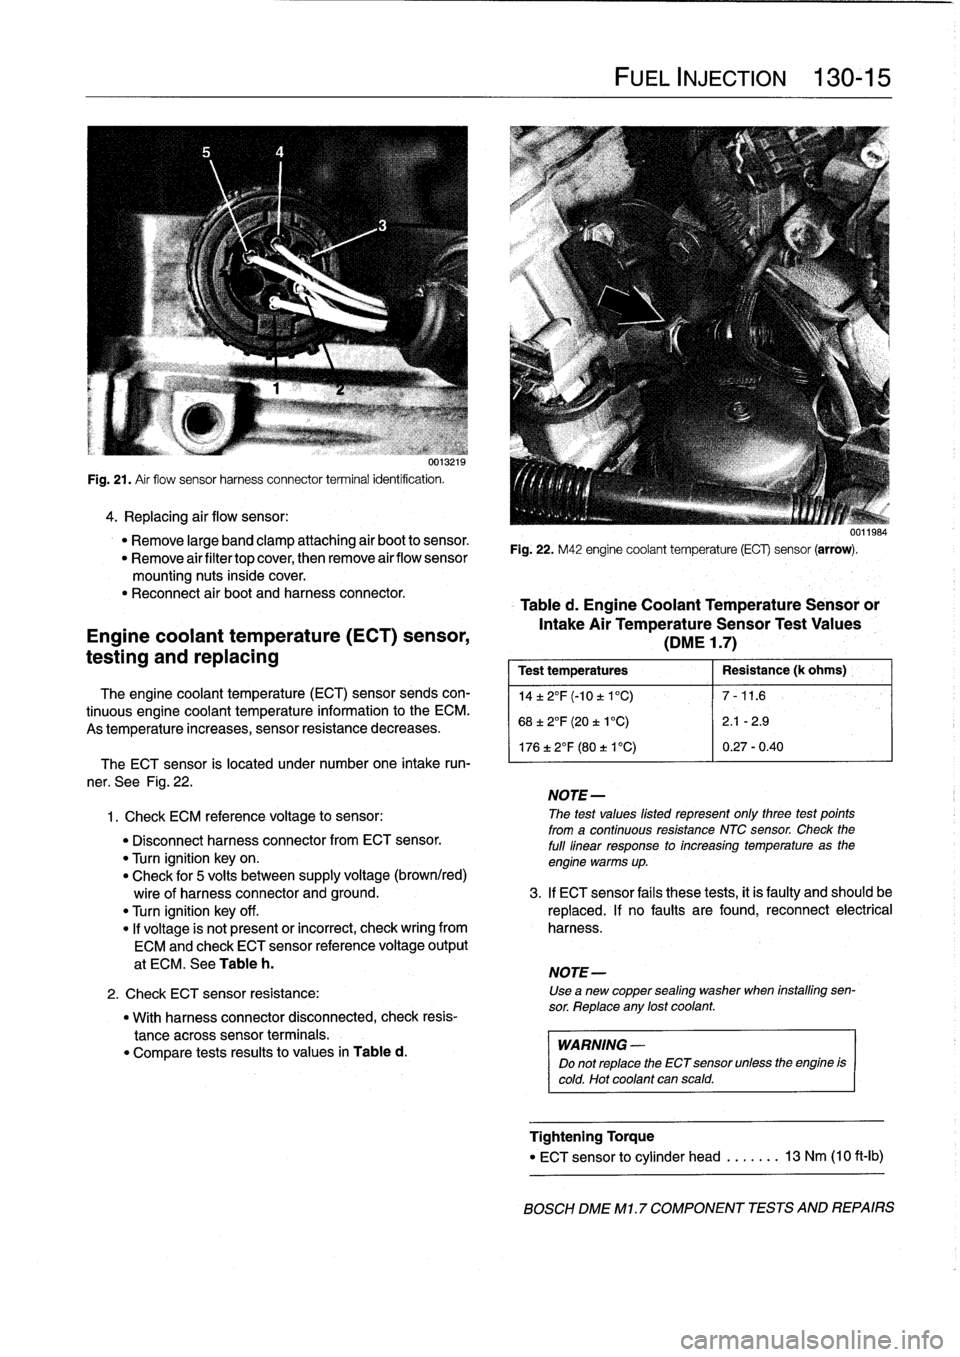 BMW M3 1992 E36 Service Manual u0
I
.[
Ia

Fig
.
21
.
Air
flow
sensor
harness
connector
terminal
identification
.

4
.
Replacing
air
flow
sensor
:

"
Remove
large
band
clamp
attaching
air
boot
to
sensor
.

"
Remove
airfiltertop
cov